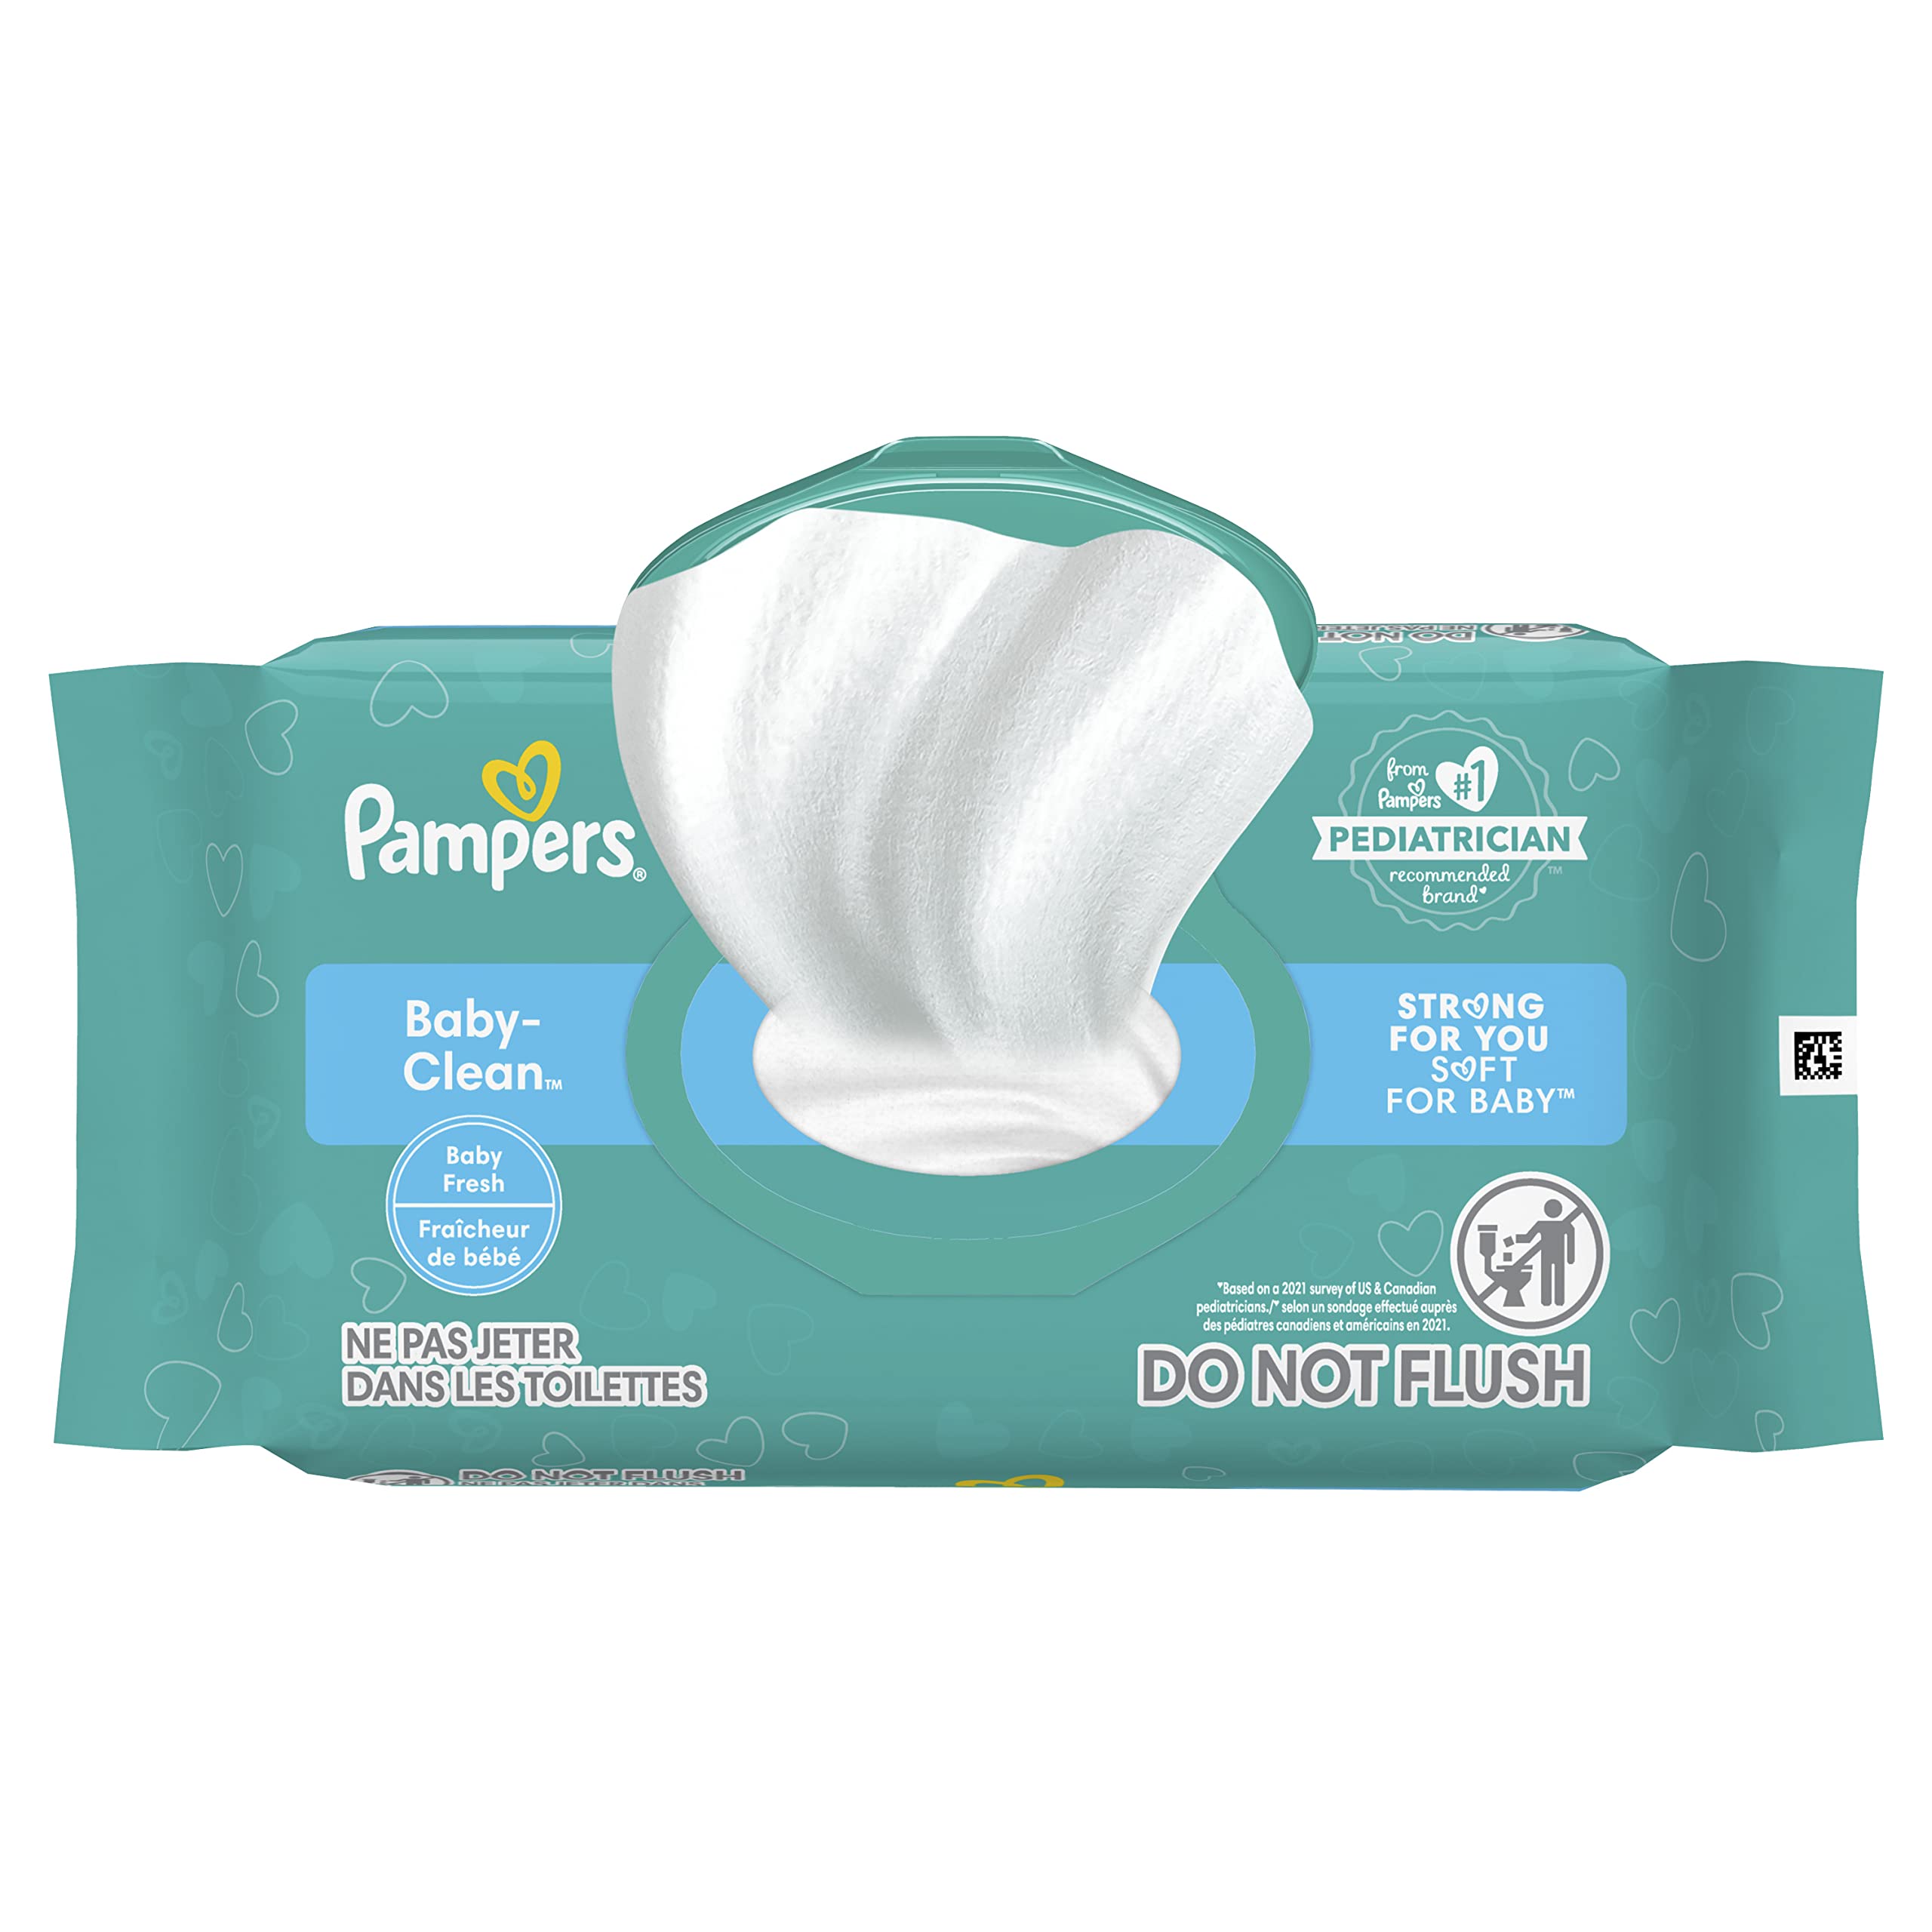 Pampers Baby Wipes Baby Fresh Scented 1X Pop-Top Packs 72 Count